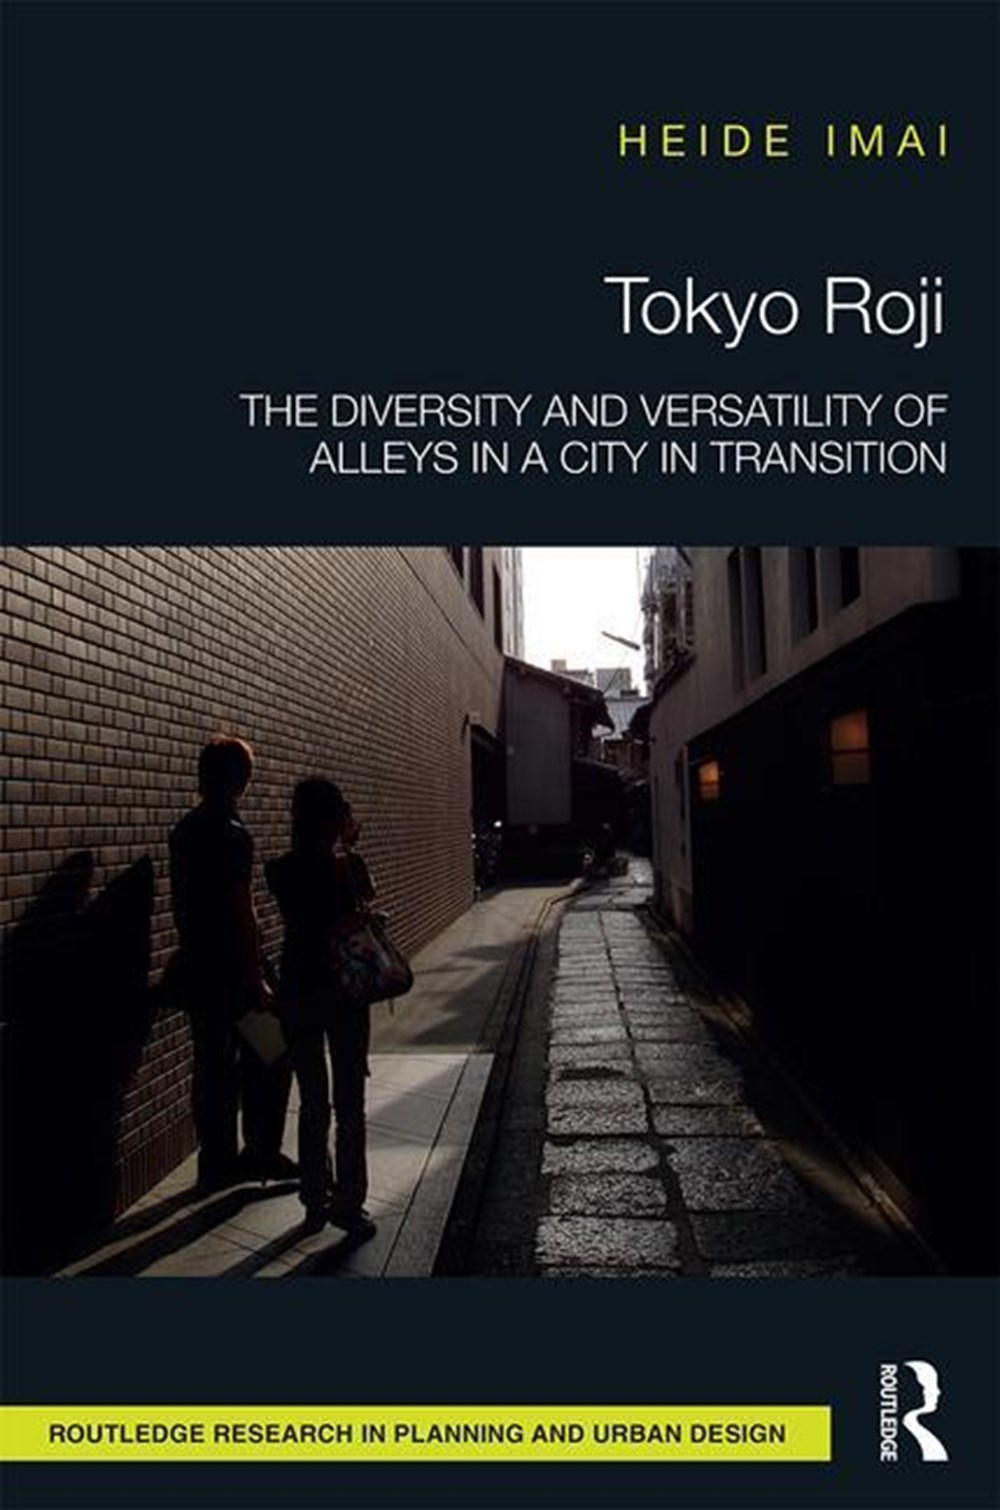 Tokyo Roji: The Diversity and Versatility of Alleys in a City in Transition